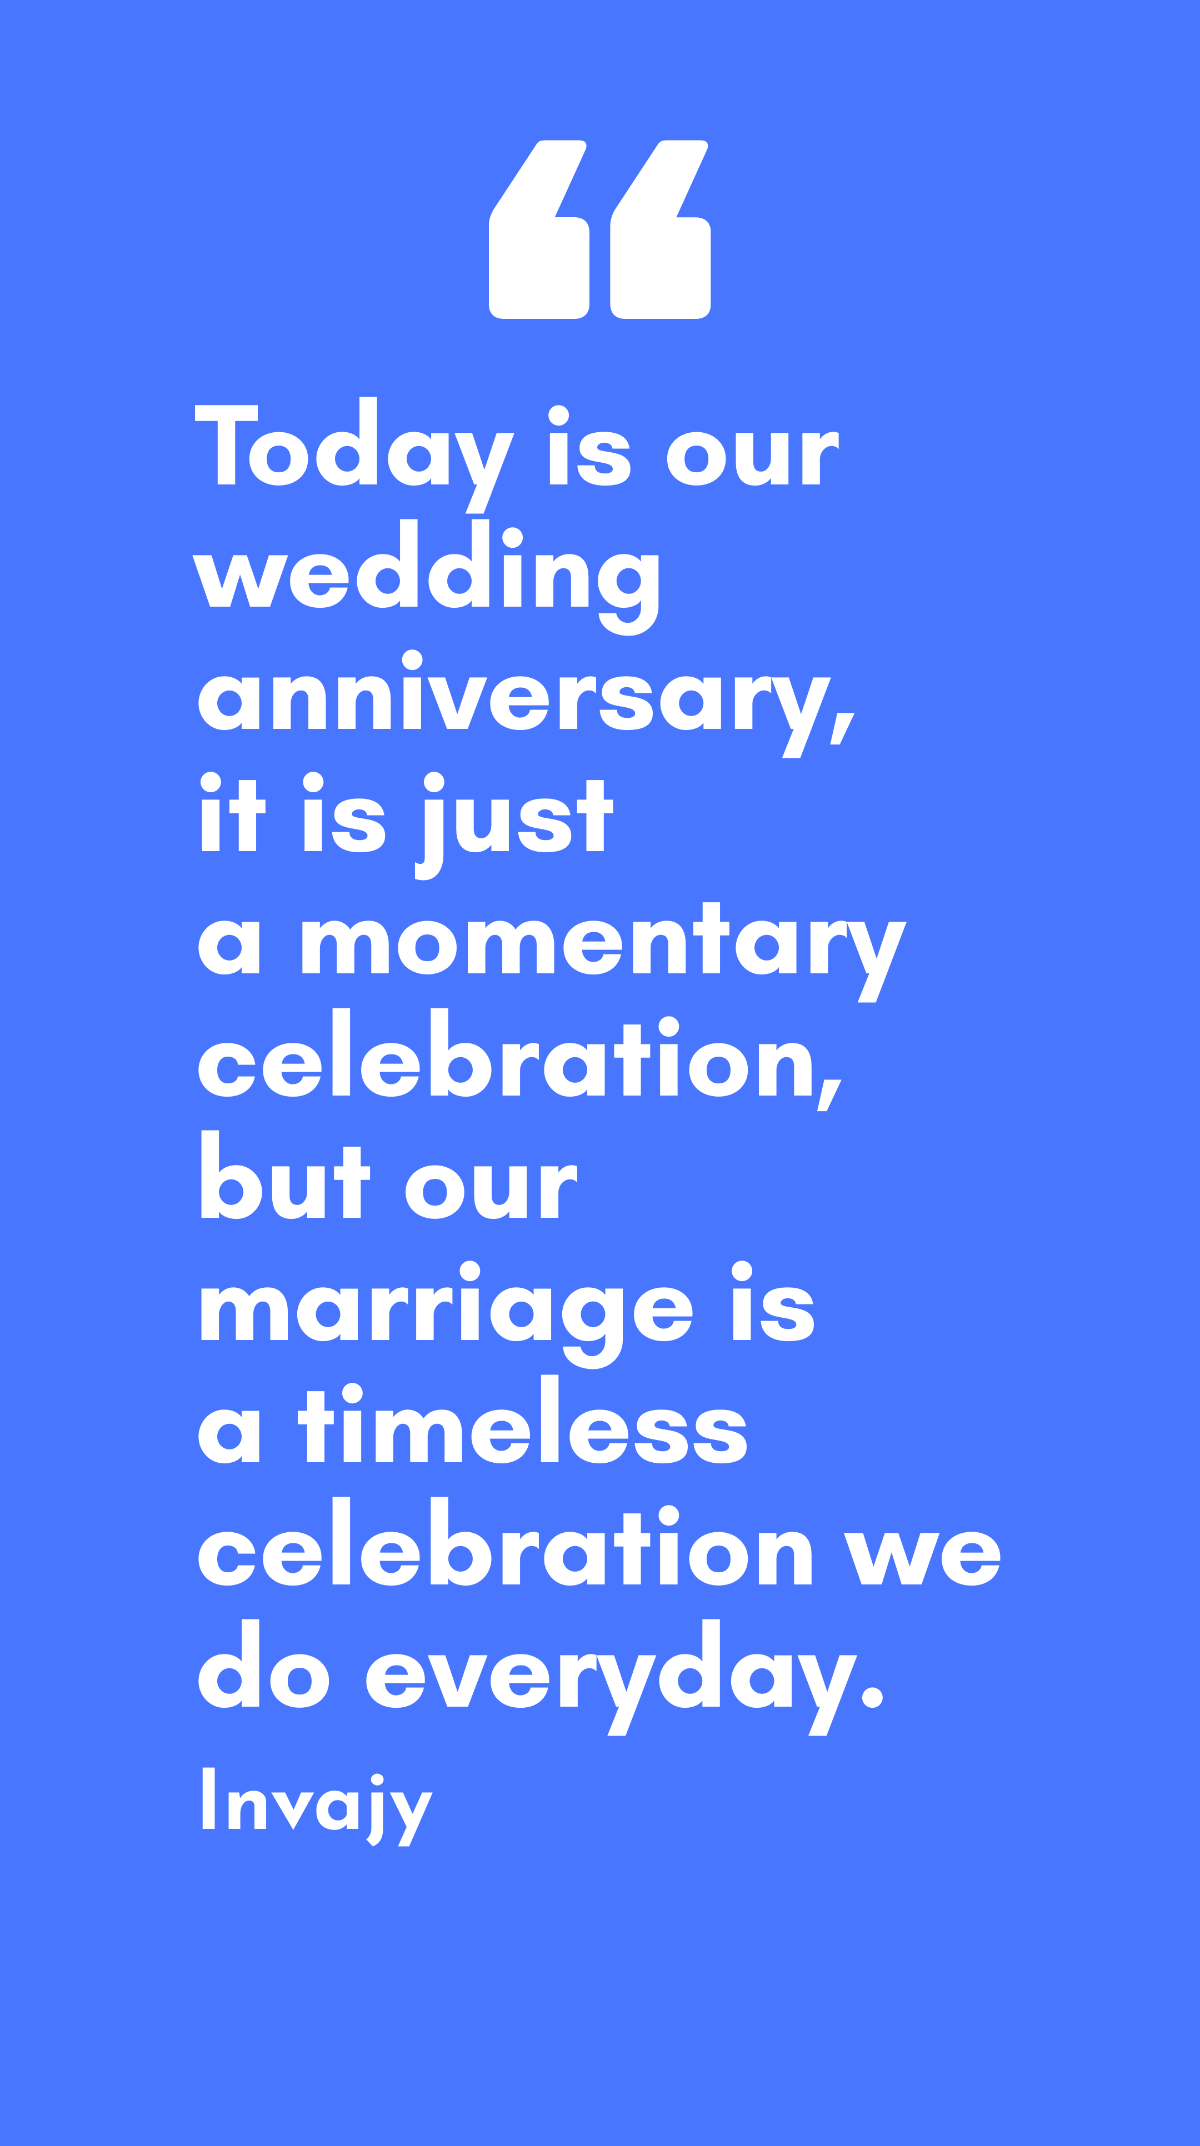 Invajy - Today is our wedding anniversary, it is just a momentary celebration, but our marriage is a timeless celebration we do everyday. Template